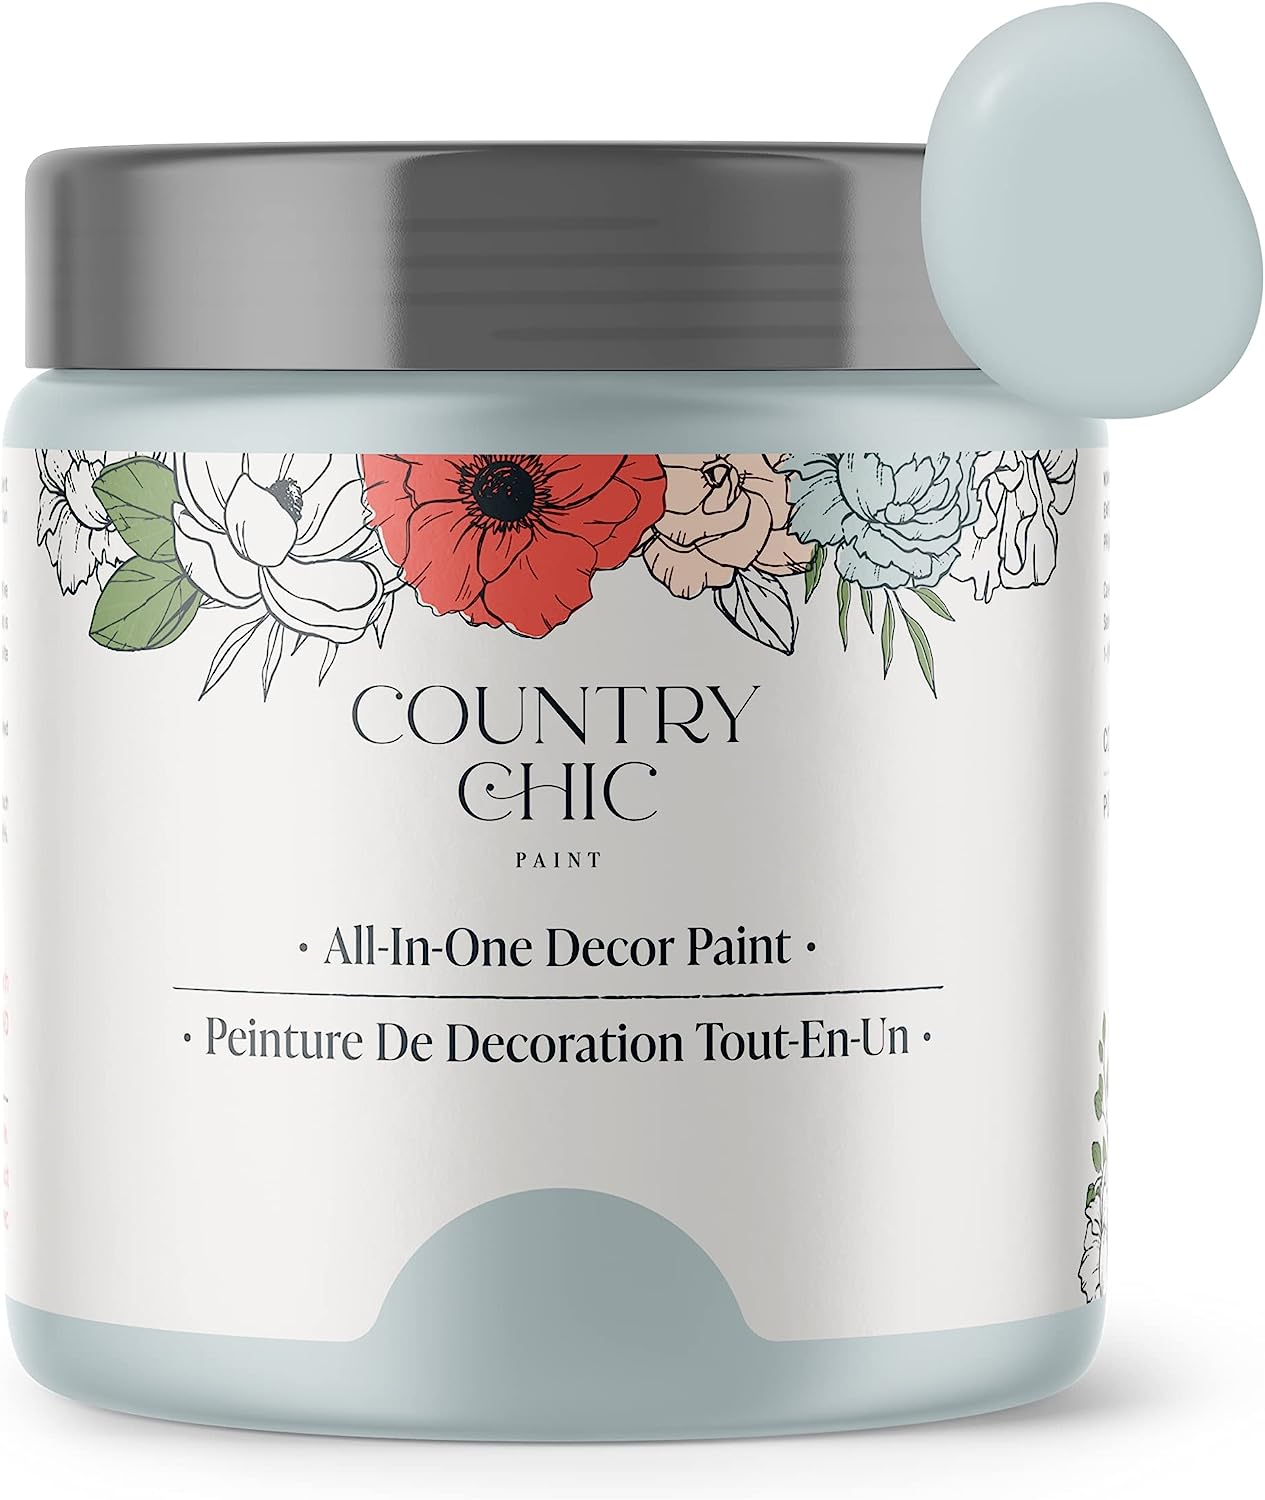 Country Chic Paint - Chalk Style All-in-One Paint for [...]